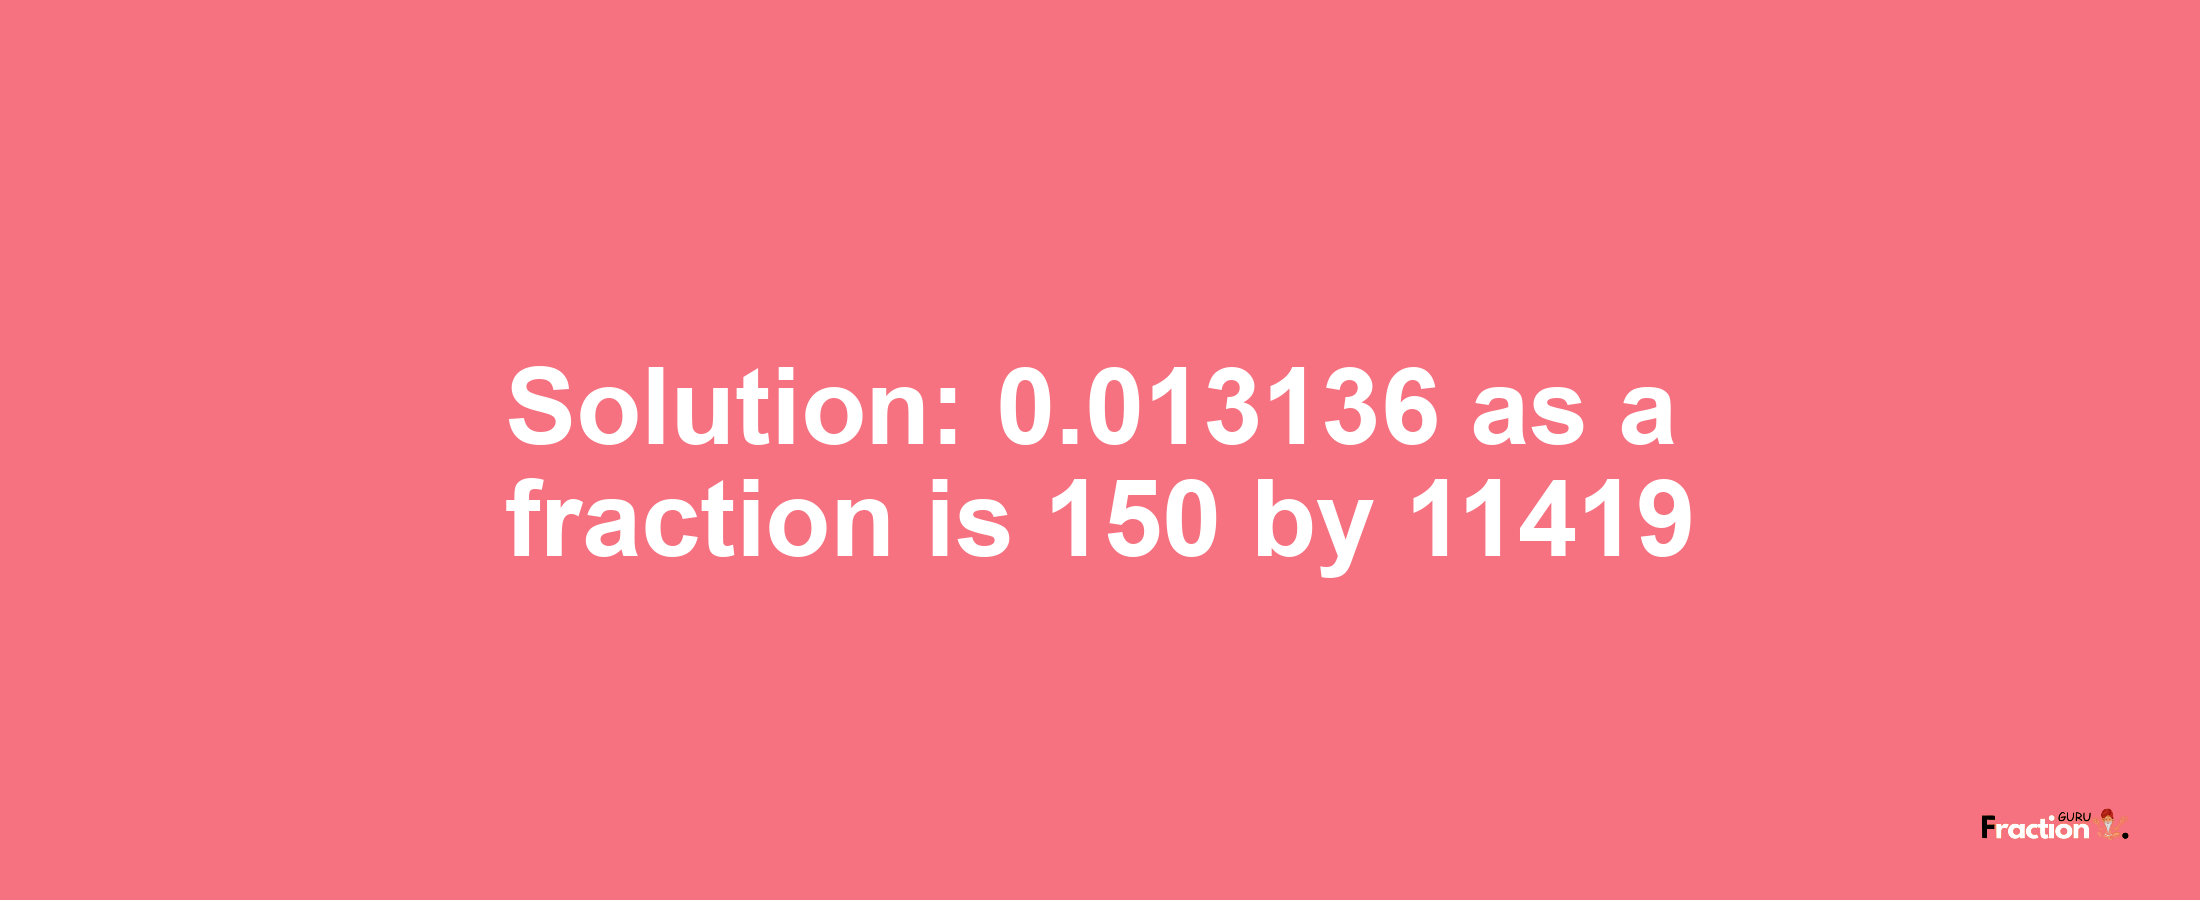 Solution:0.013136 as a fraction is 150/11419